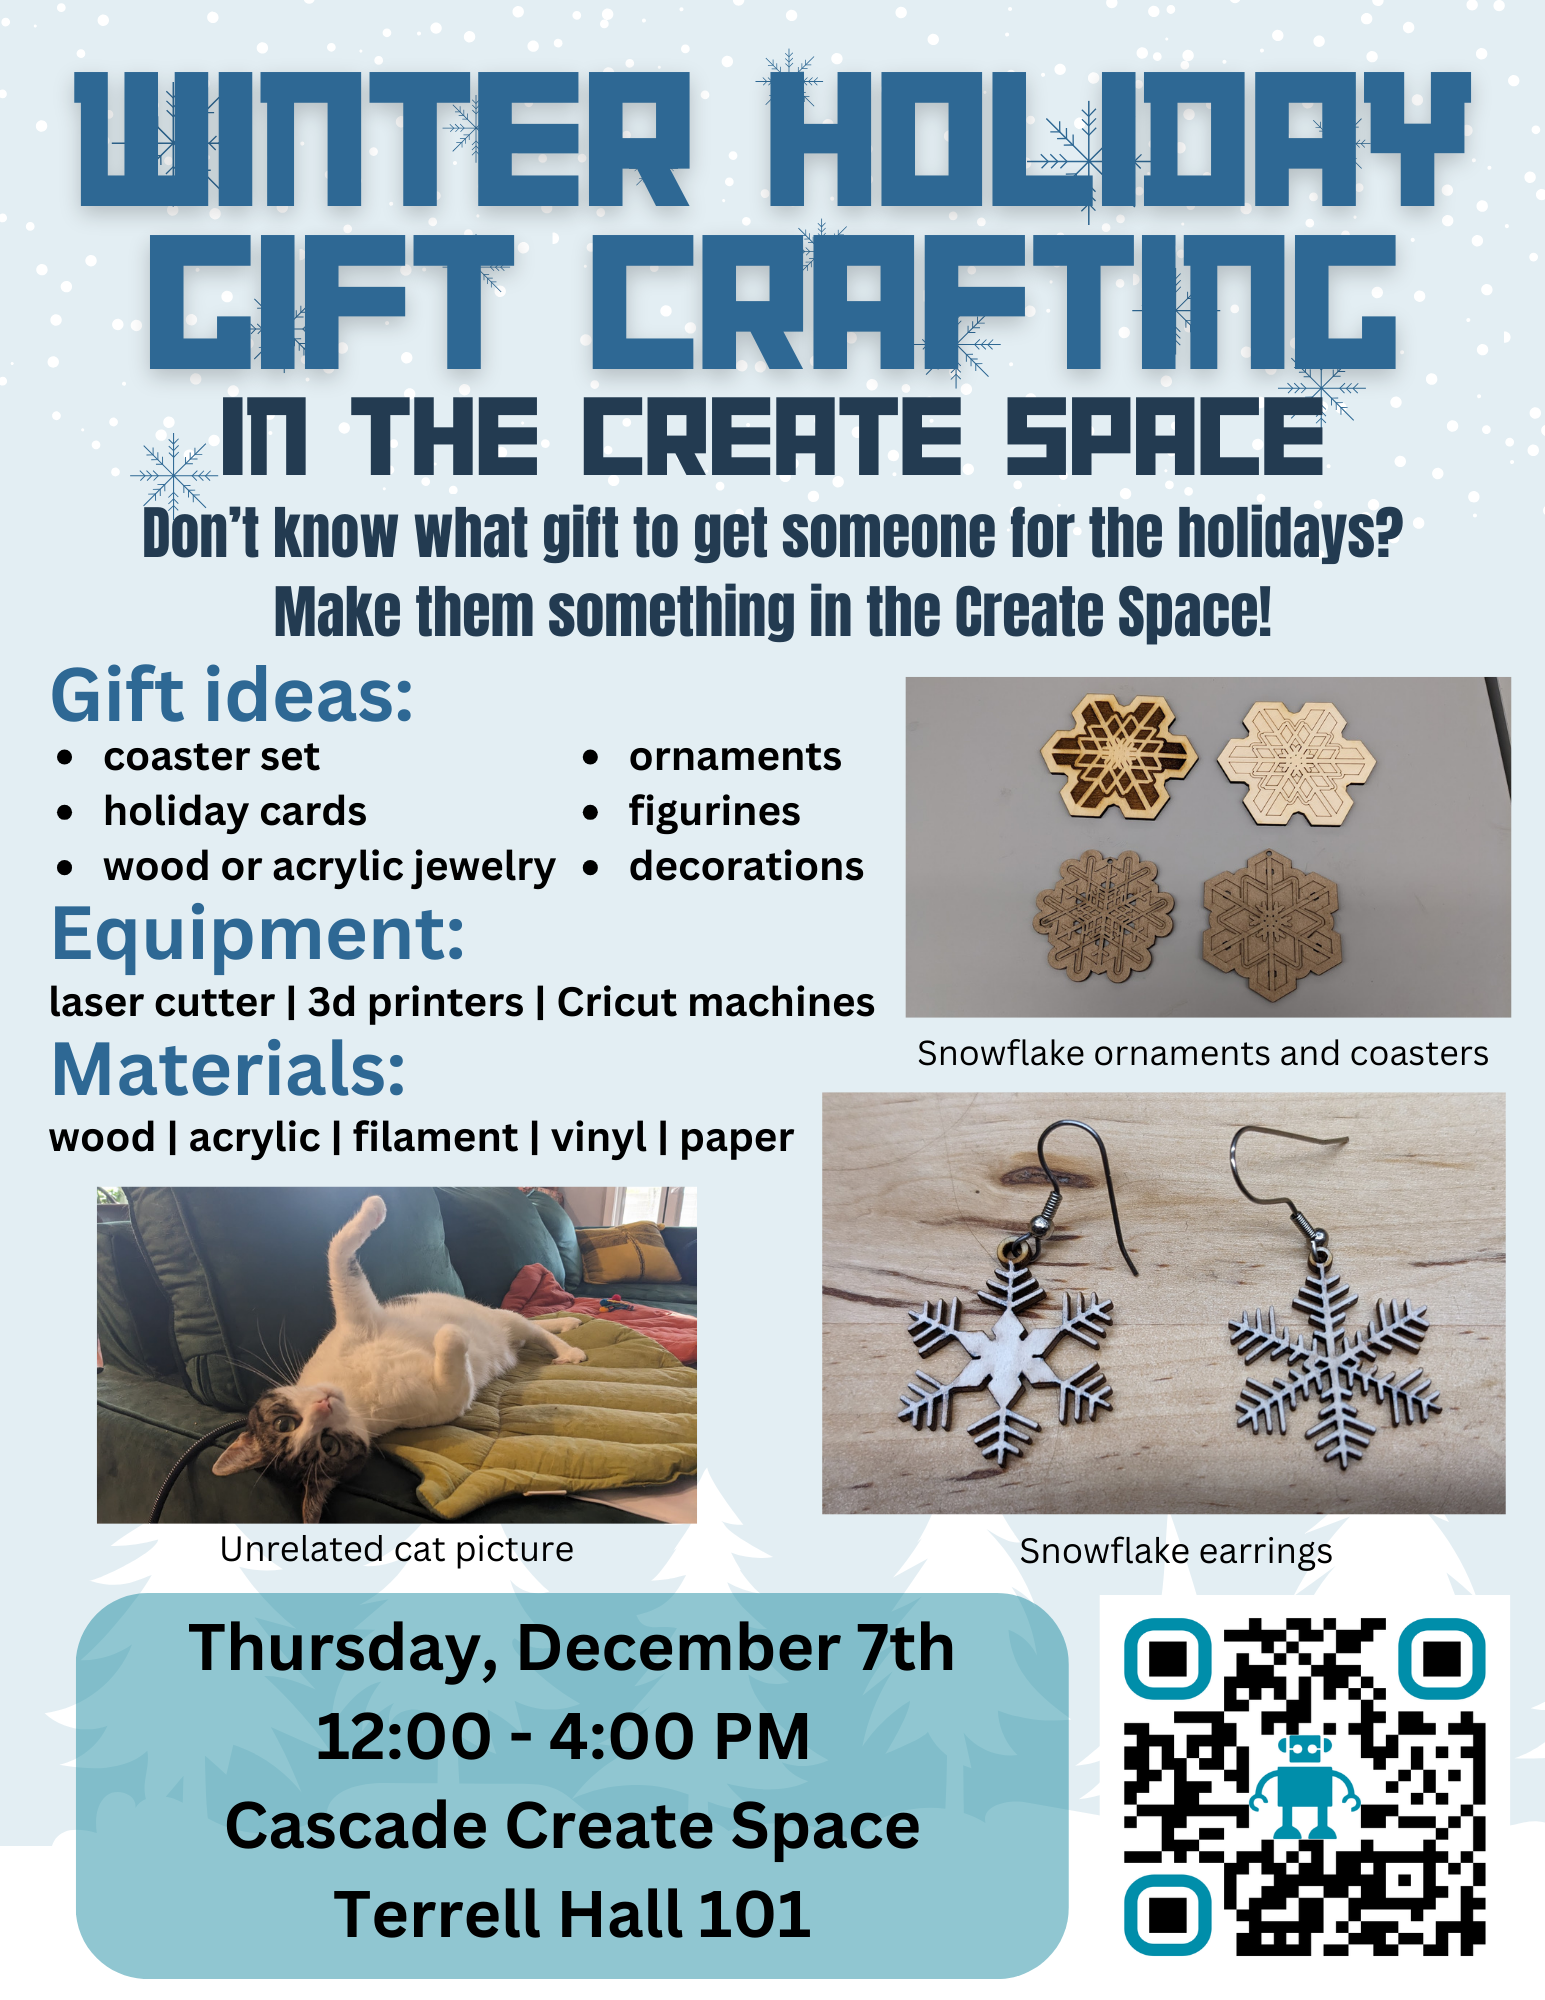 Winter Holiday Gift Crafting in the Create Space Don’t know what gift to get someone for the holidays? Make them something in the Create Space! Gift ideas: coaster set holiday cards wood or acrylic jewelry ornaments figurines decorations Equipment: laser cutter | 3d printers | Cricut machines Materials: wood | acrylic | filament | vinyl | paper Thursday, December 7th 12:00 - 4:00 PM Cascade Create Space Terrell Hall 101